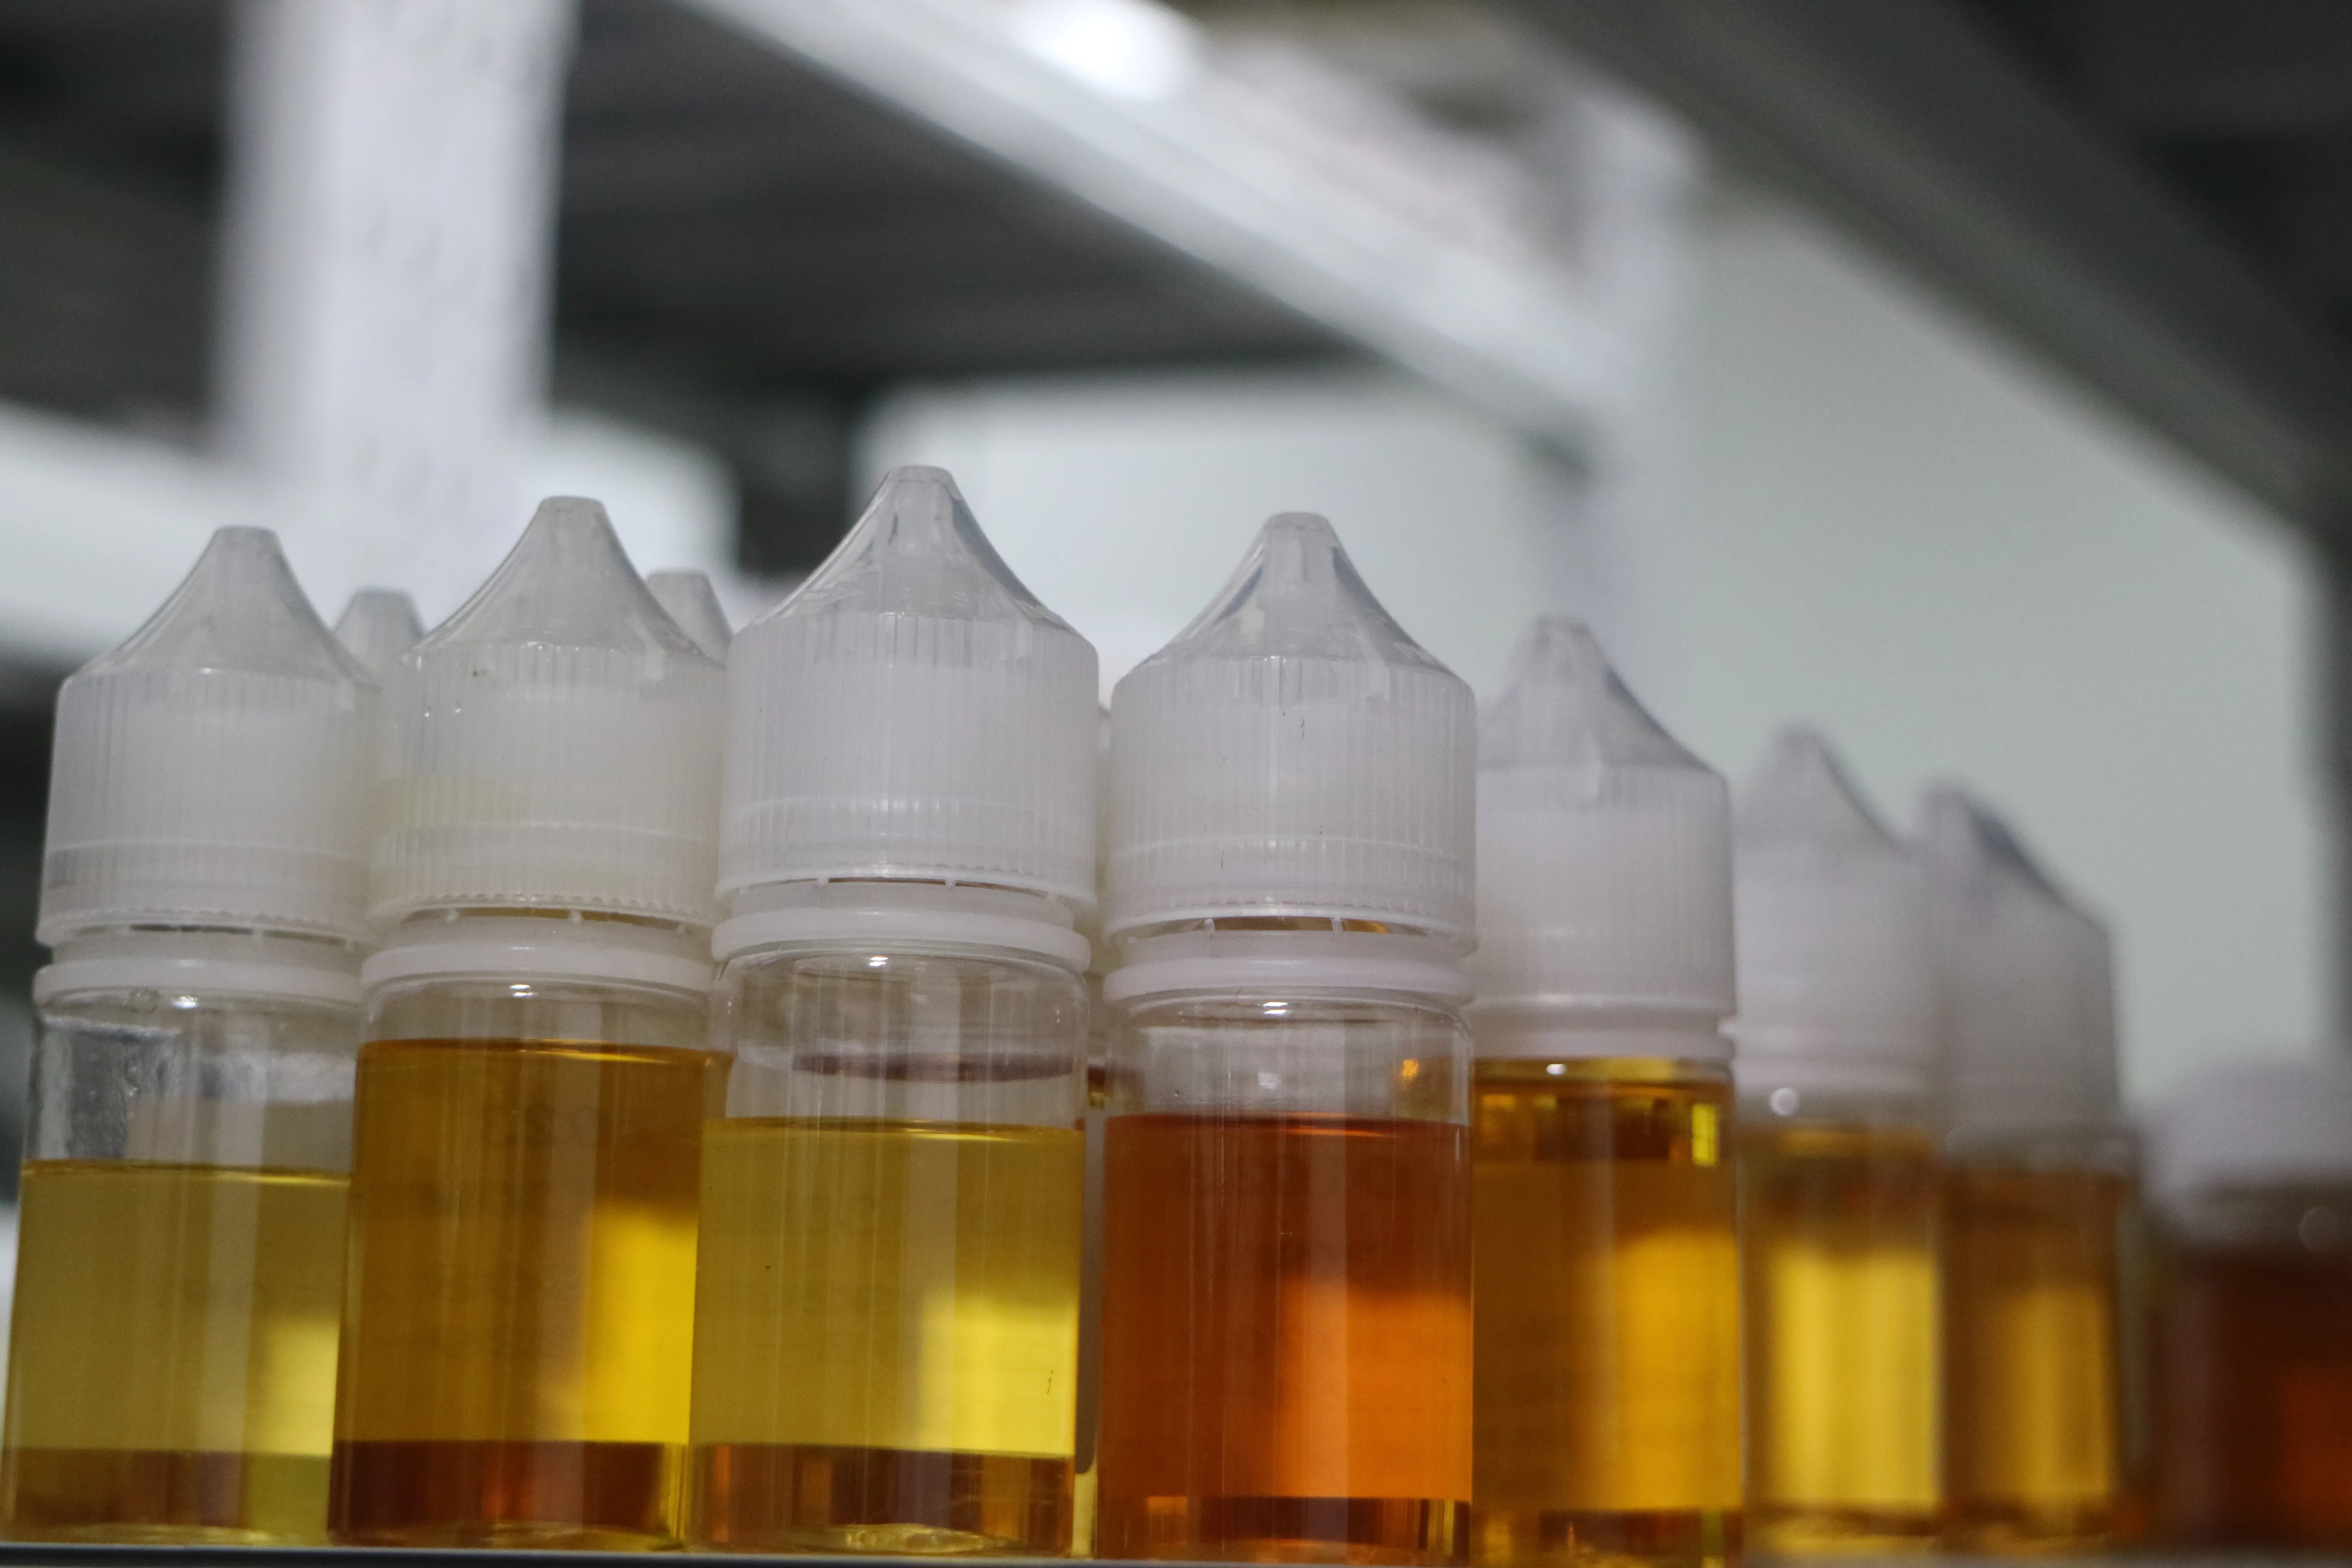 Can e-liquid be brought on board a plane? How much e-liquid can be brought?